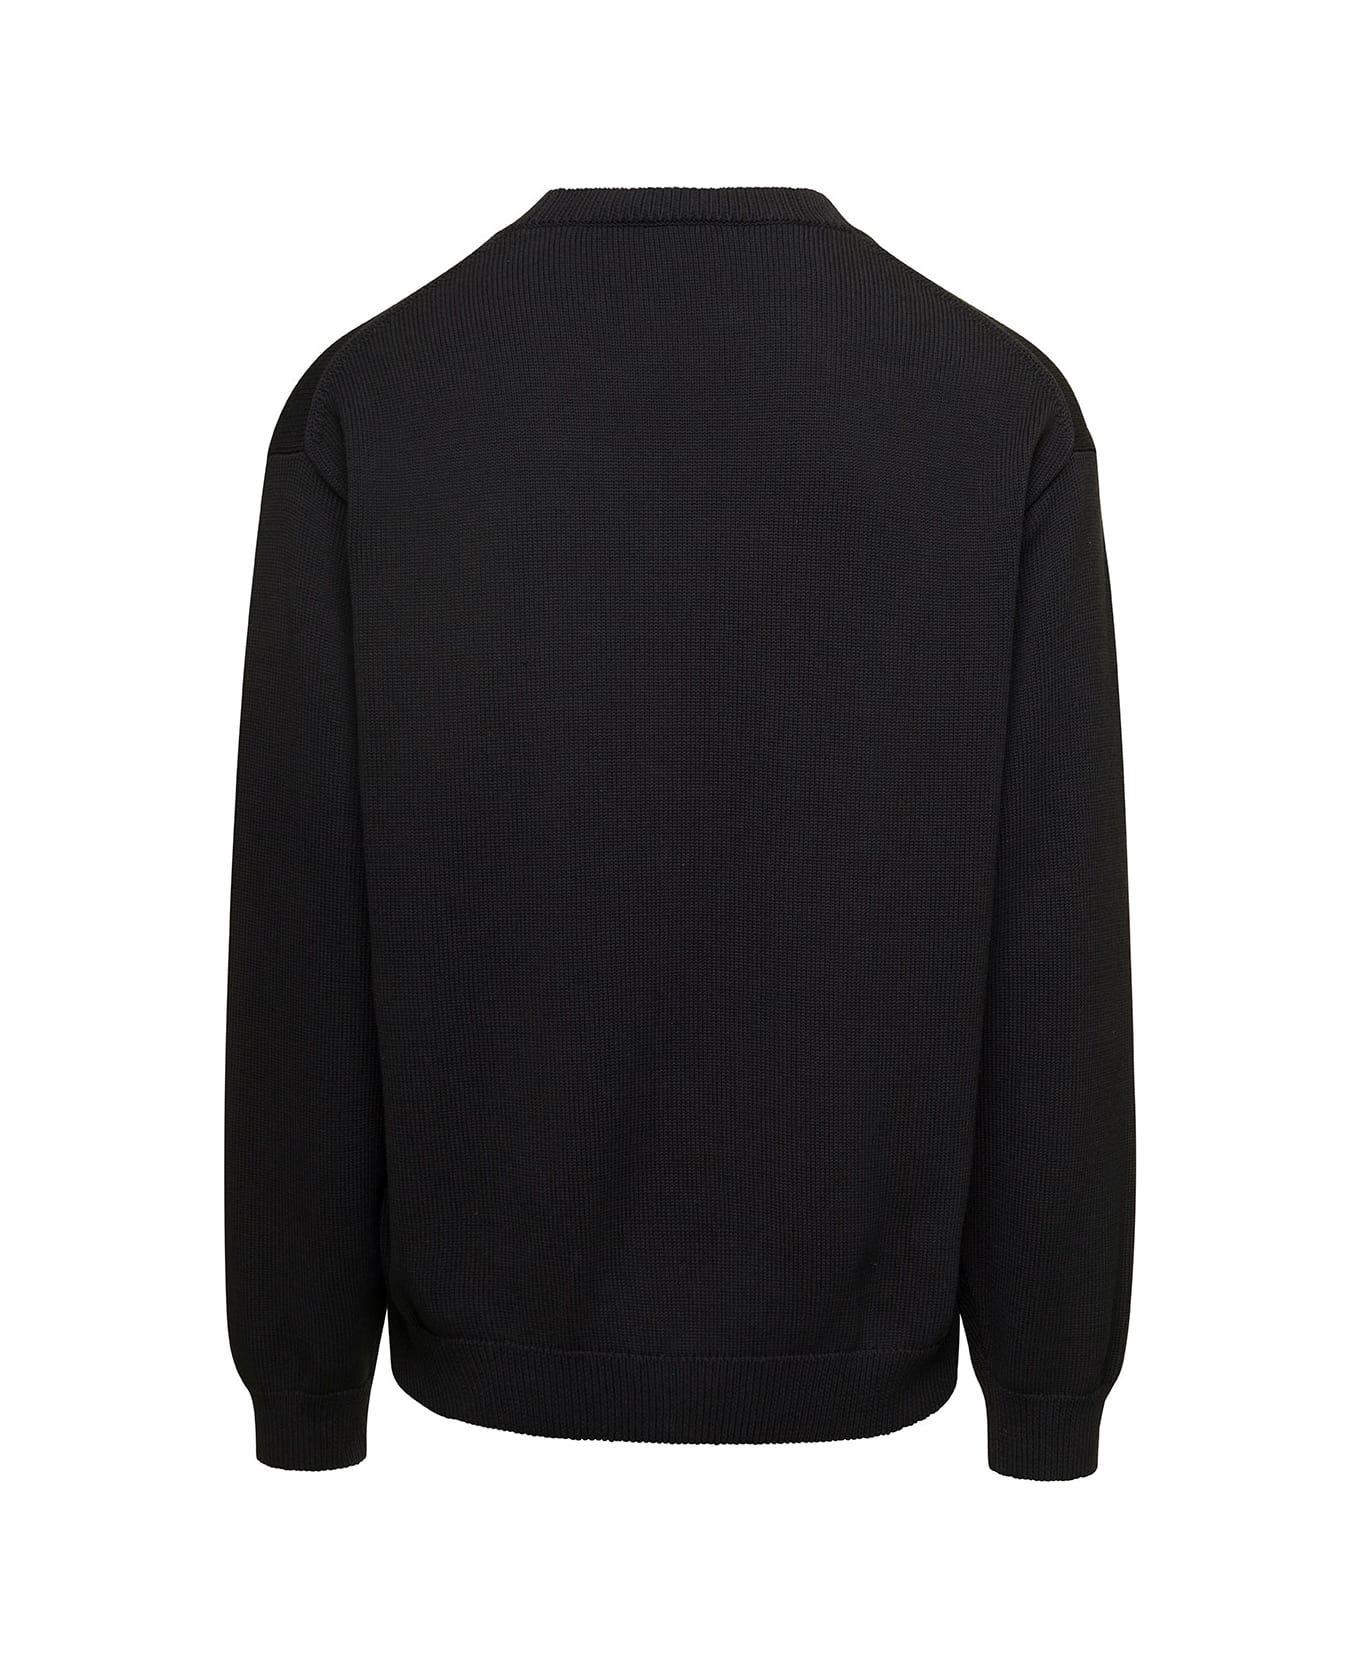 Kenzo Black Crewneck Jumper With Logo And Boke Flower On The Chest In Cotton Man - Black